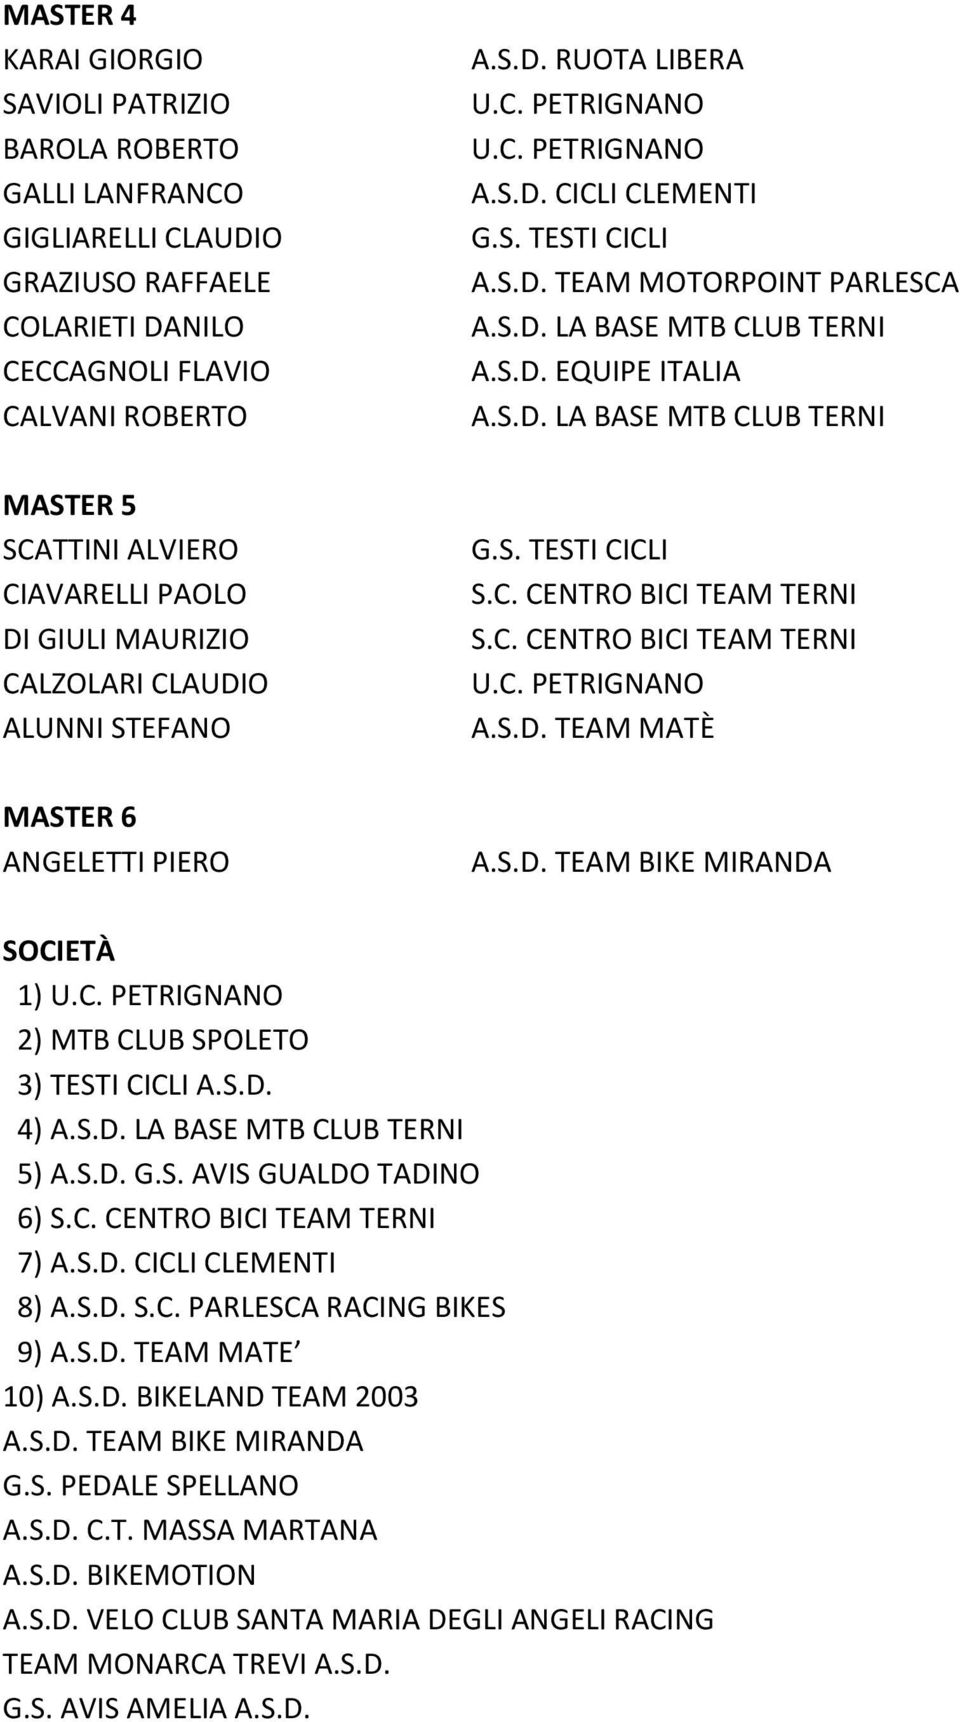 S.D. 4) 5) A.S.D. G.S. AVIS GUALDO TADINO 6) 7) A.S.D. CICLI CLEMENTI 8) A.S.D. S.C. PARLESCA RACING BIKES 9) A.S.D. TEAM MATE 10) A.S.D. BIKELAND TEAM 2003 A.S.D. TEAM BIKE MIRANDA G.S. PEDALE SPELLANO A.